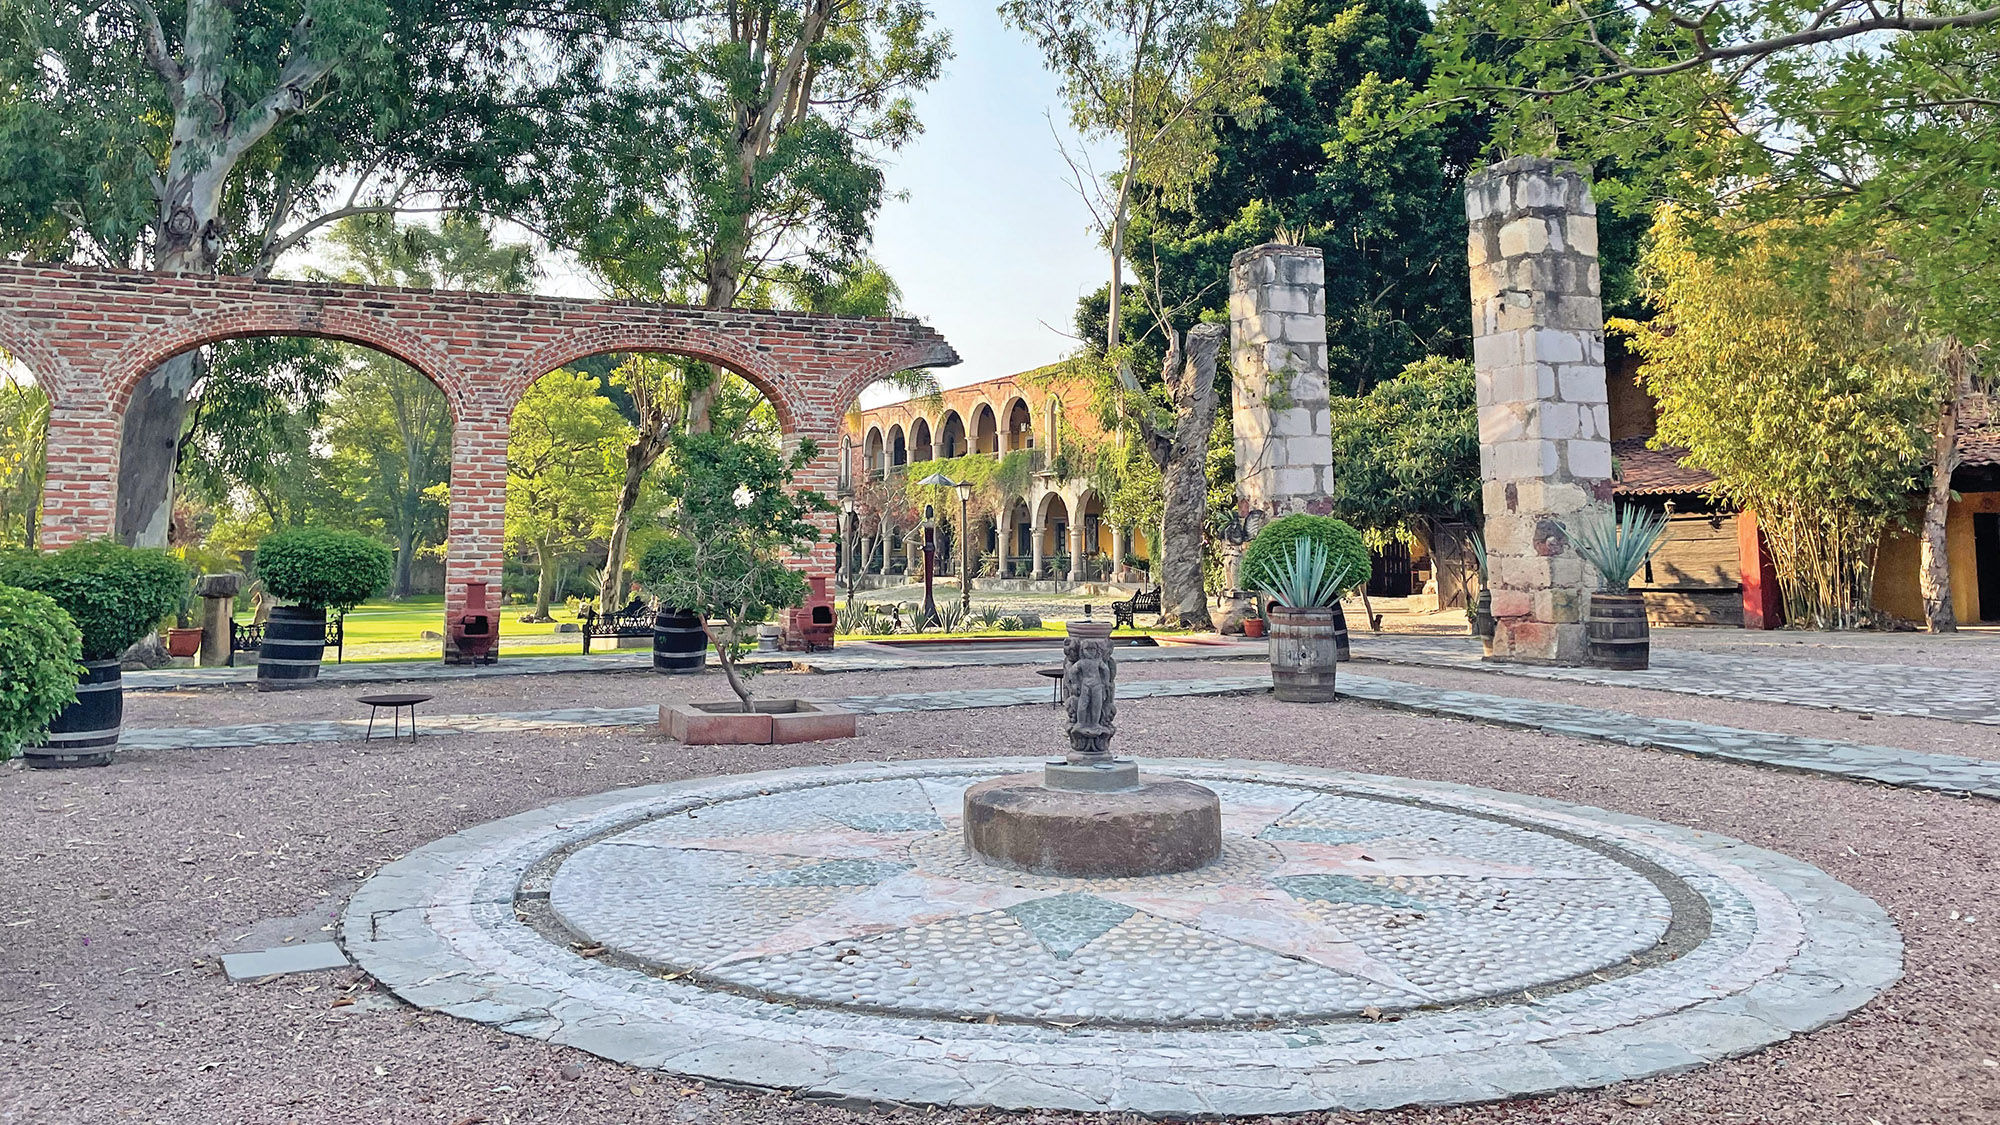 The grounds of Hacienda El Carmen are lined with walking paths and art waiting to be discovered.